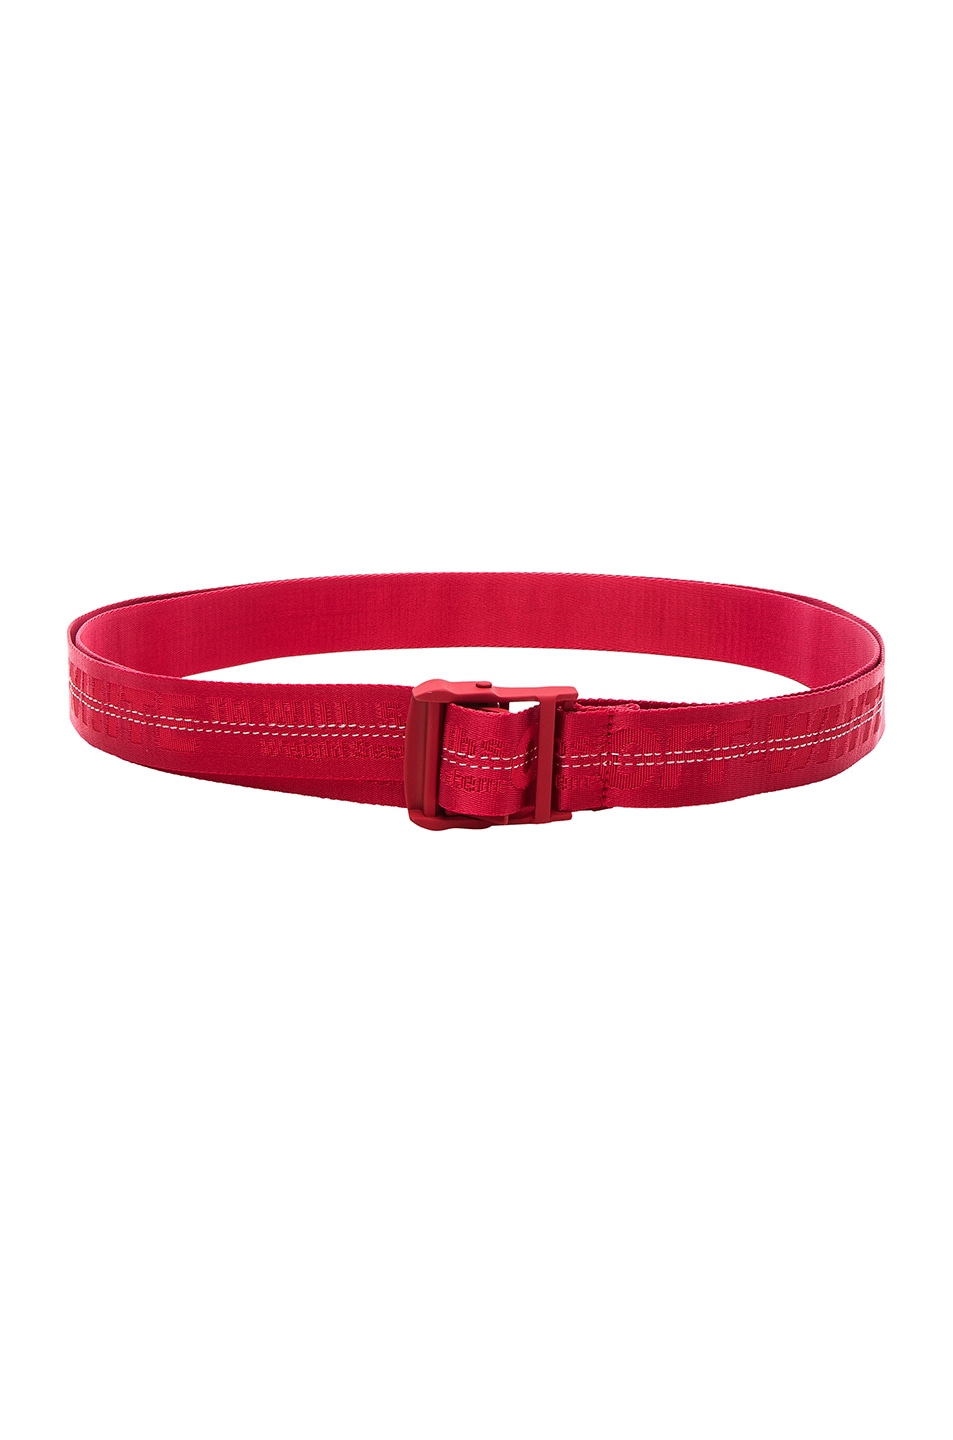 OFF-WHITE Industrial Belt in Red & Red | FWRD